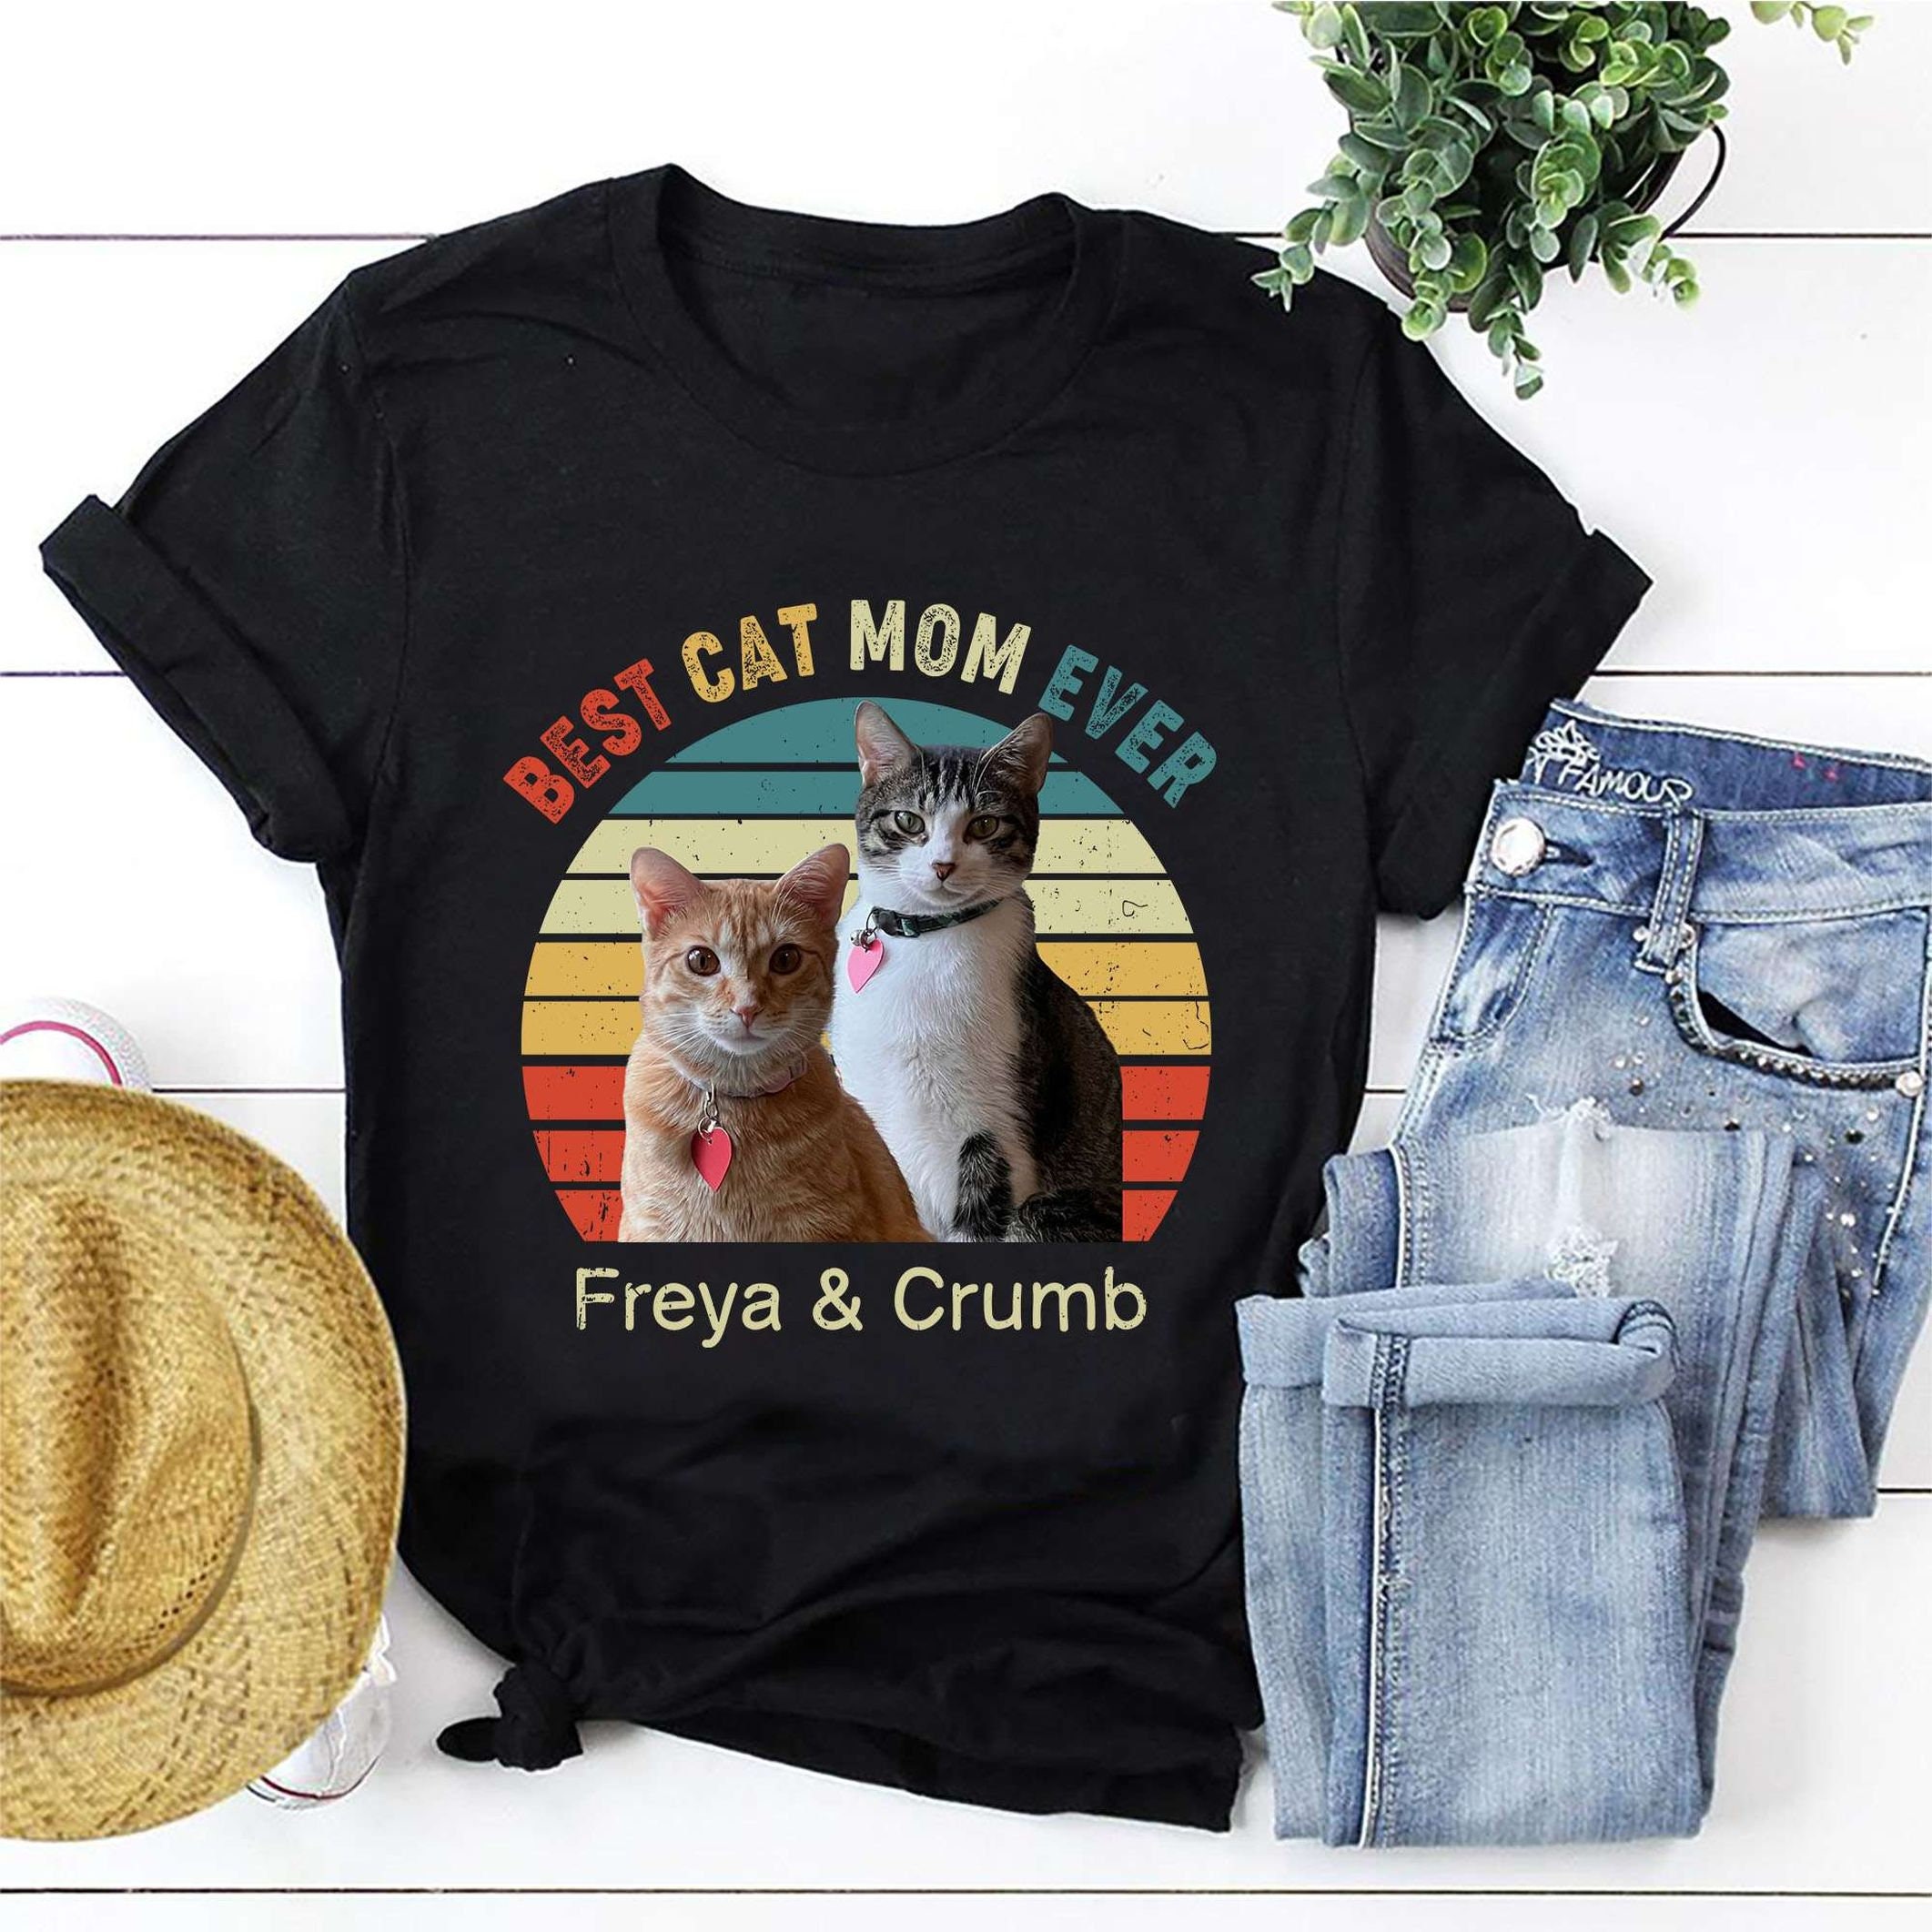 Discover Personalized Best Cat Mom Ever Retro Vintage Shirt, Funny Mom And Cat Name Shirt